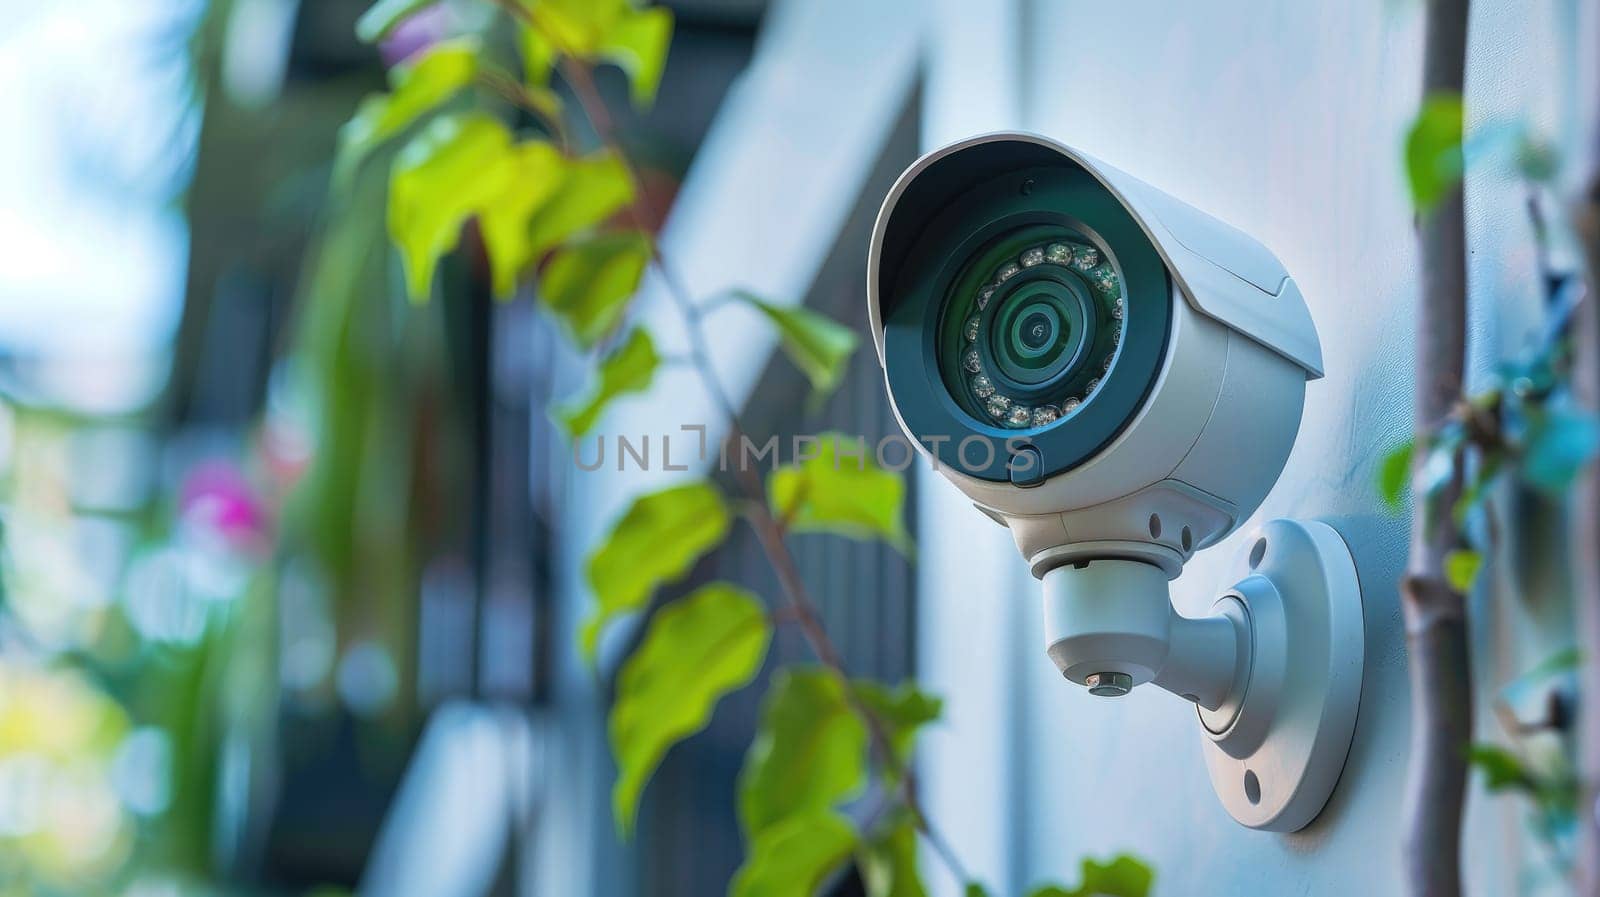 A security camera is mounted on a wall next to a green plant, Home security and Smart home concept.